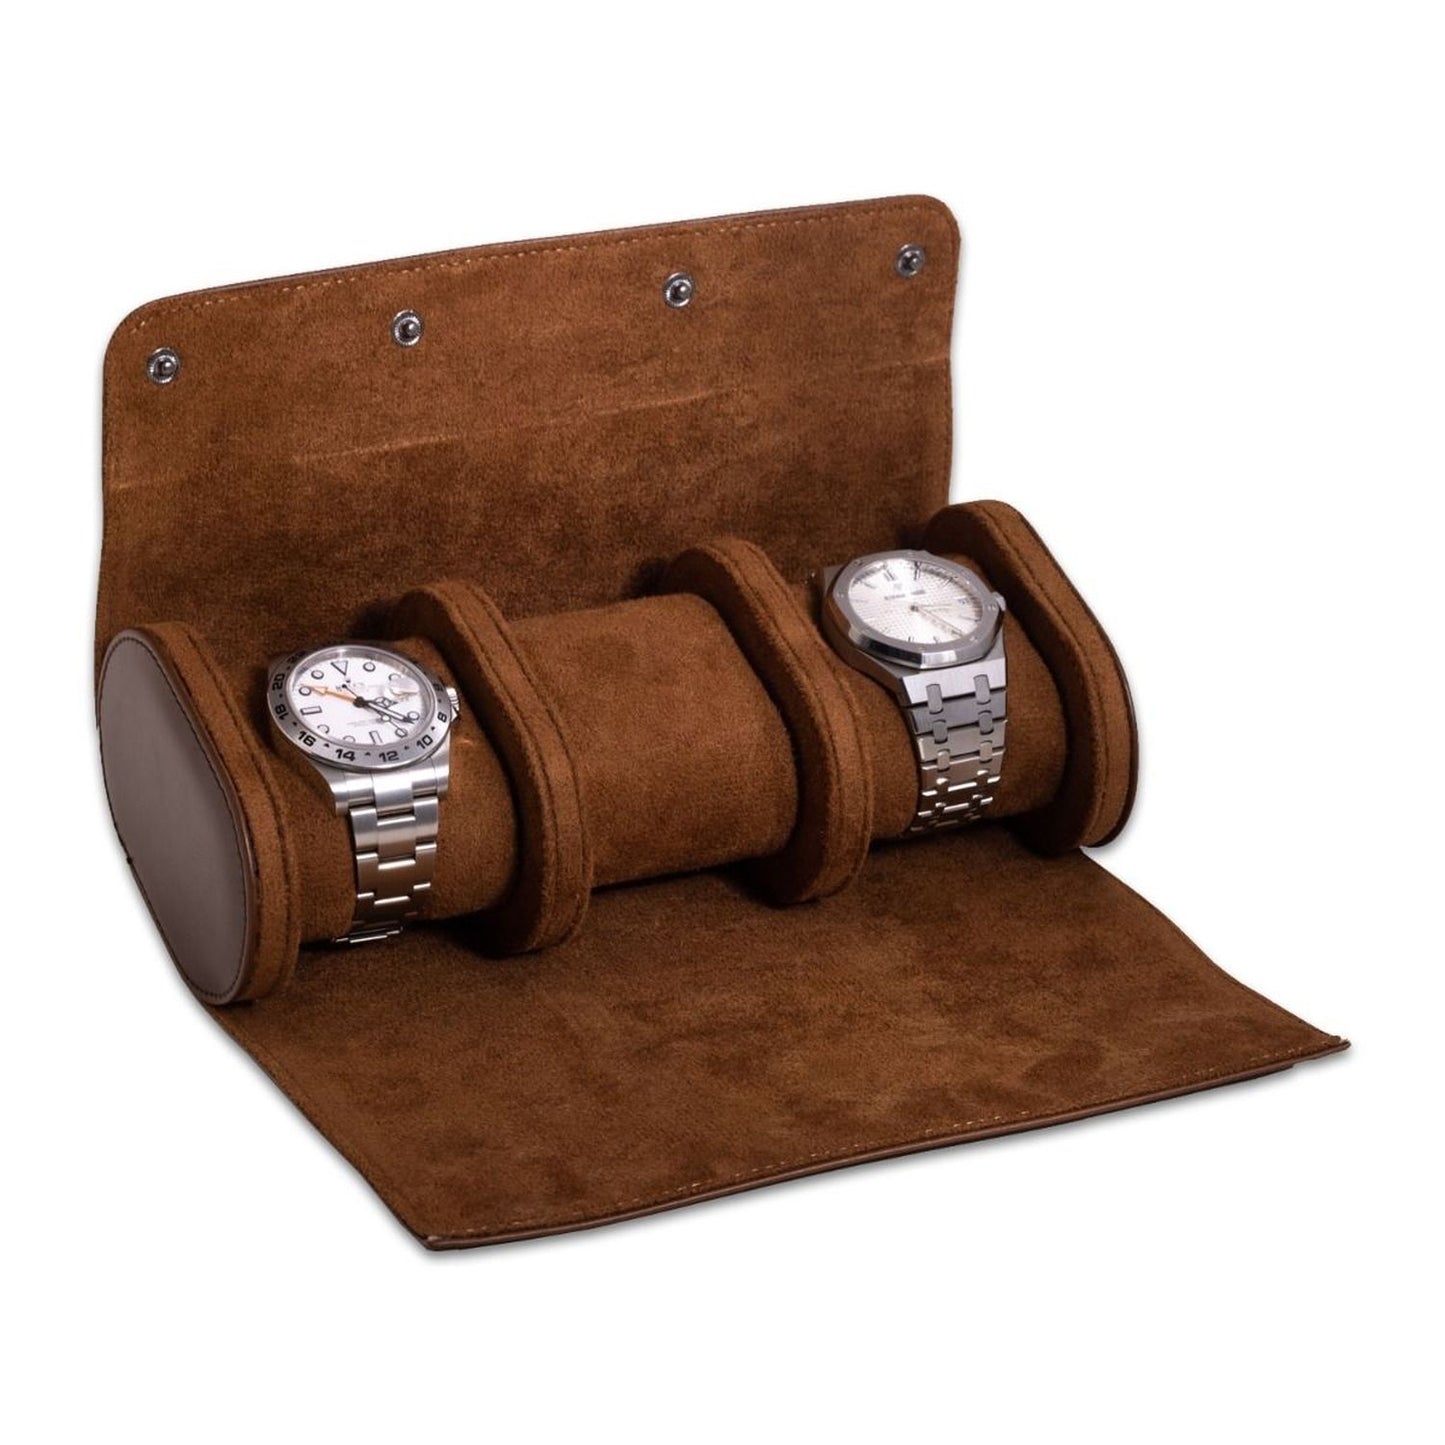 Bey Berk Milani Watch Roll For 3 Watches - Brown Leather